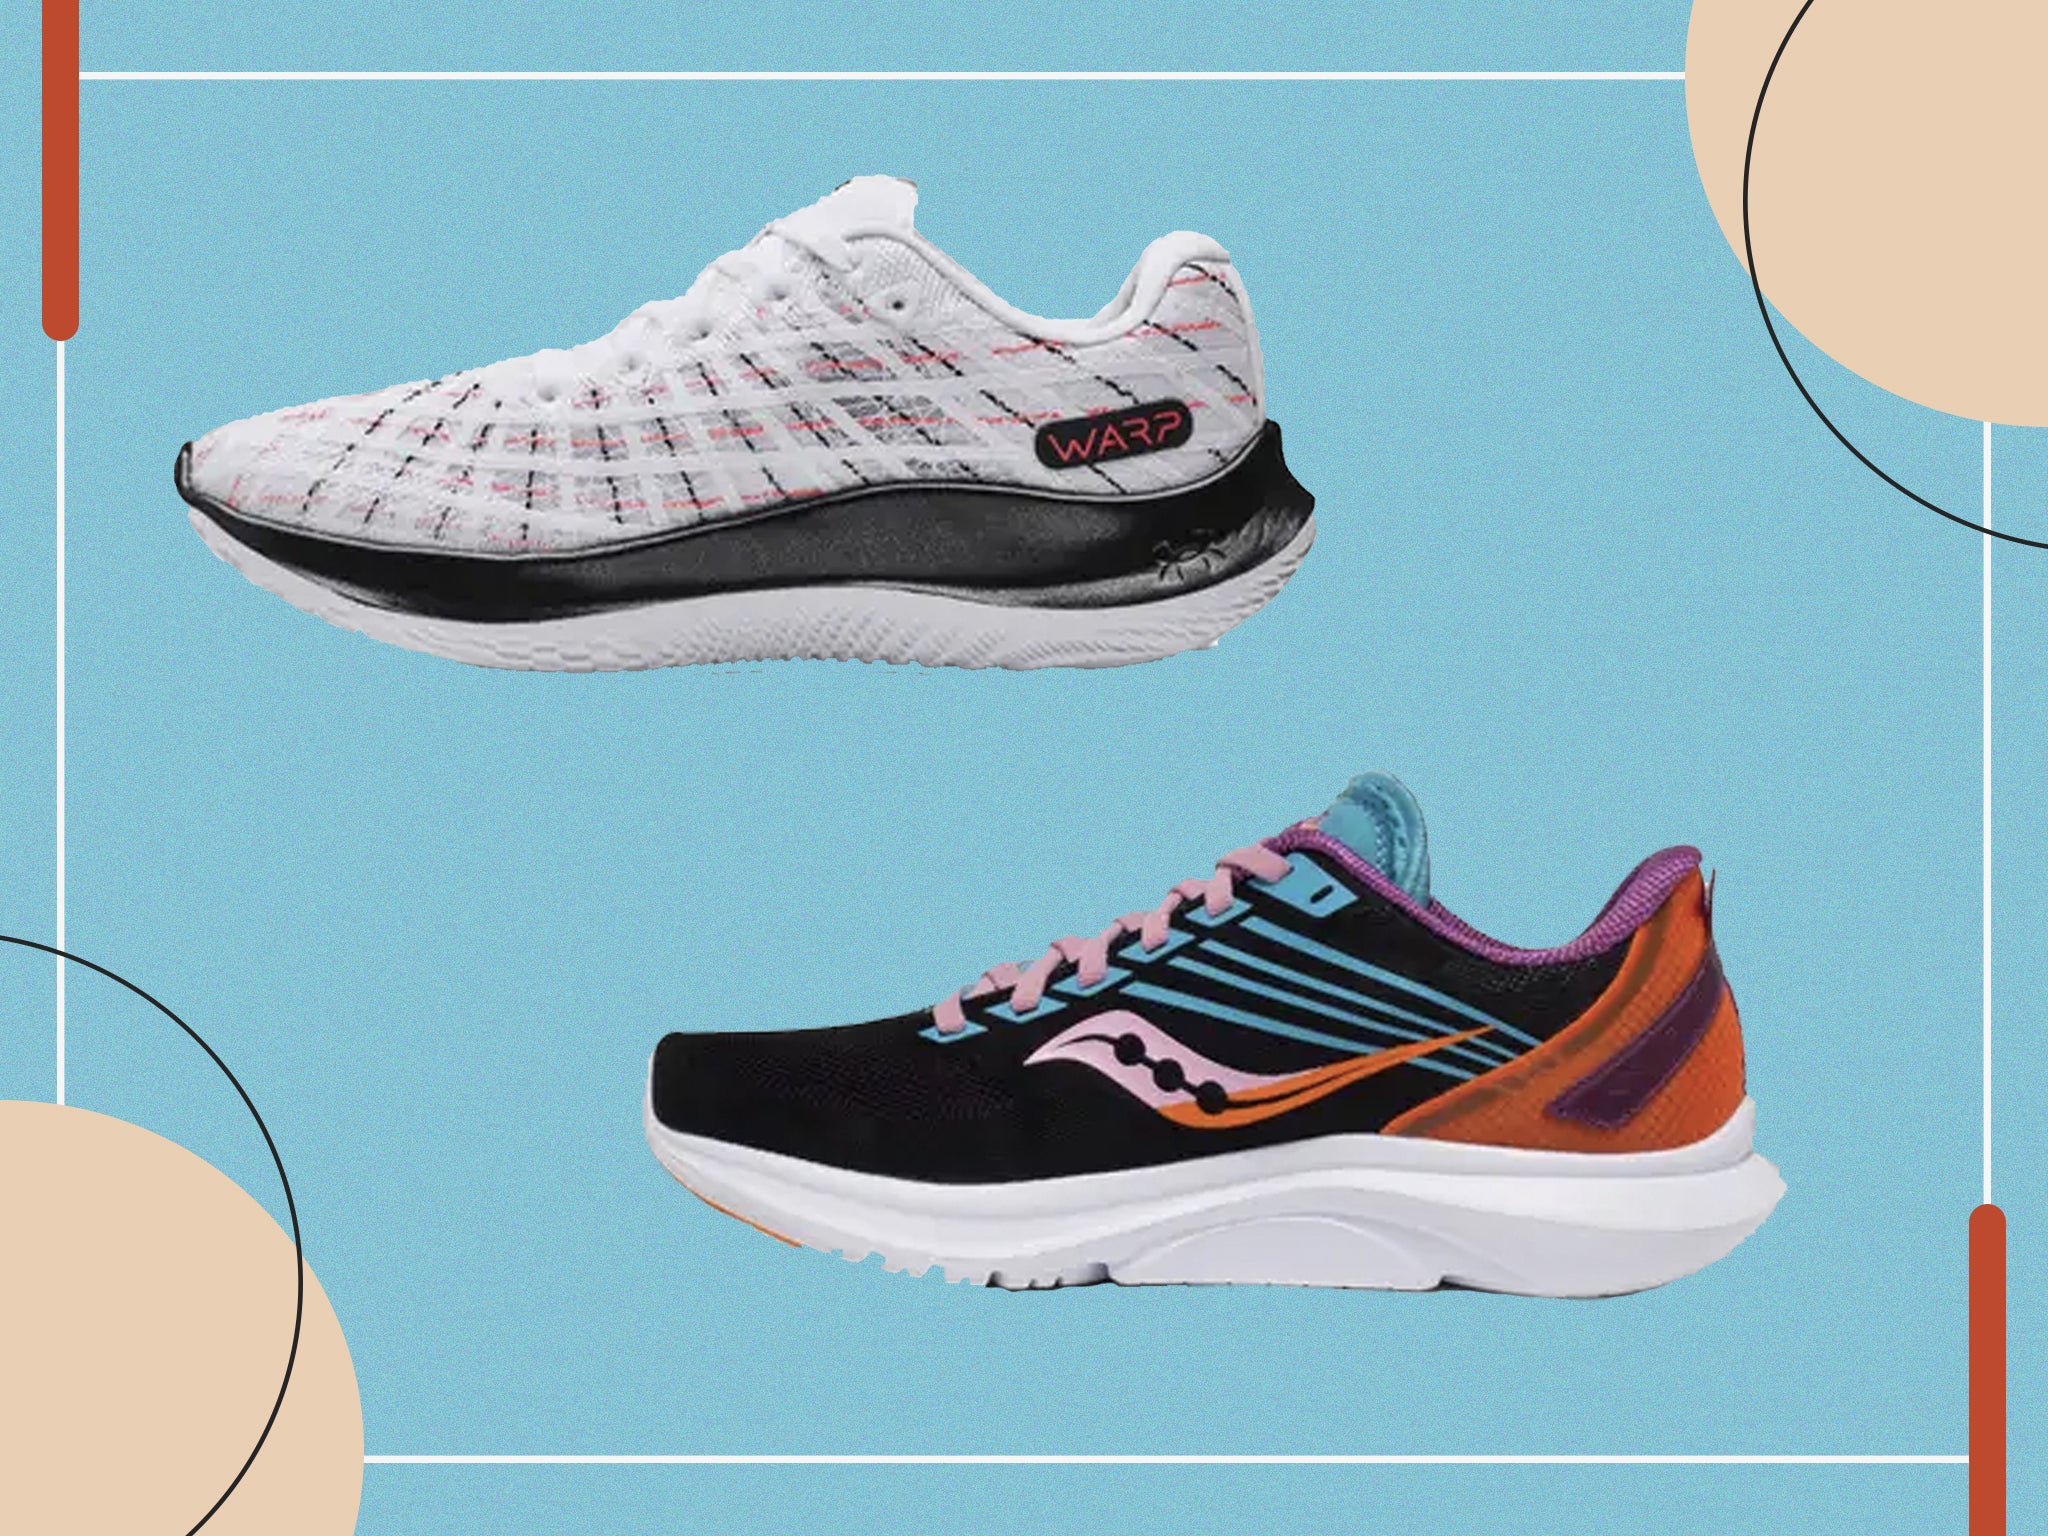 The well-known brands have both recently released innovation-packed lightweight trainers